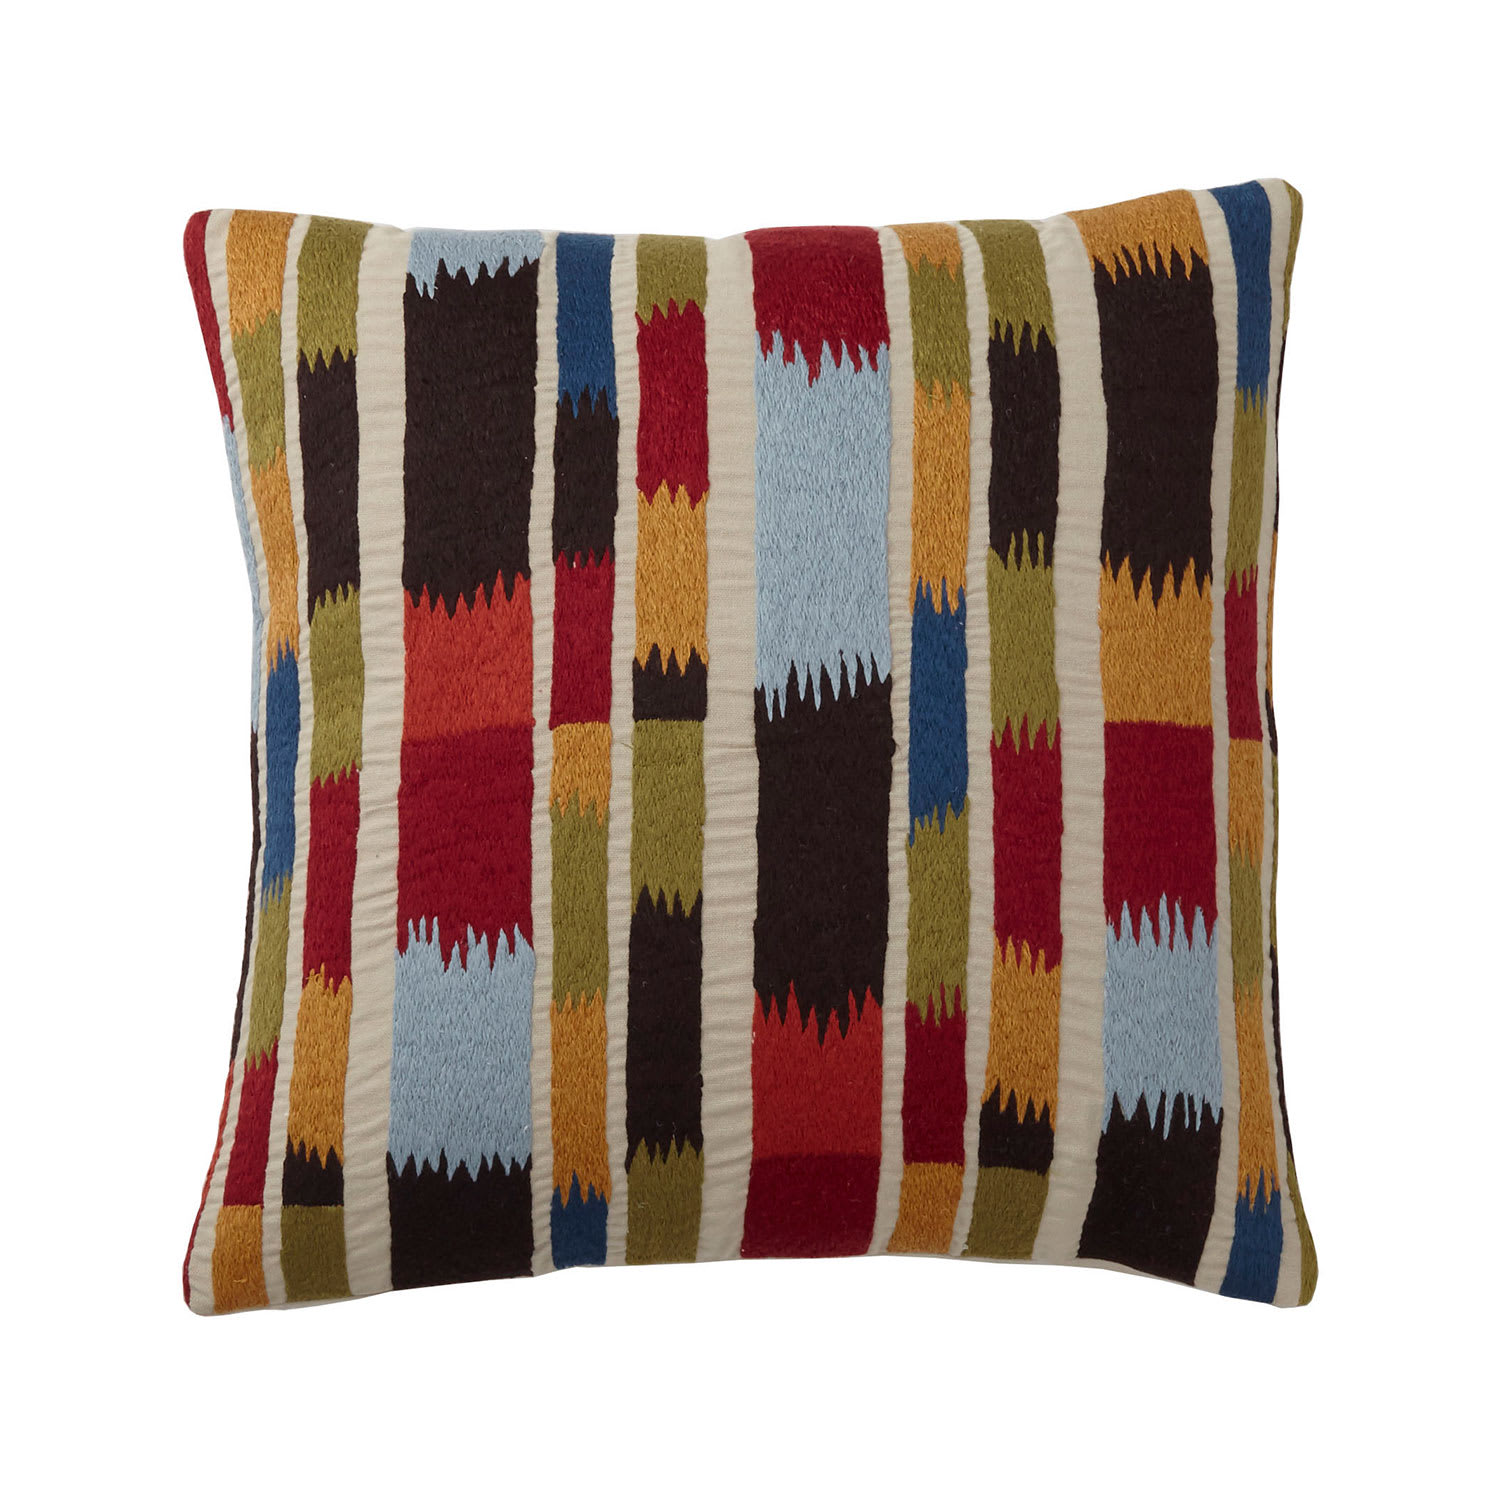 Multicolored Ikat Embroidered Pillow Cover - Ikat